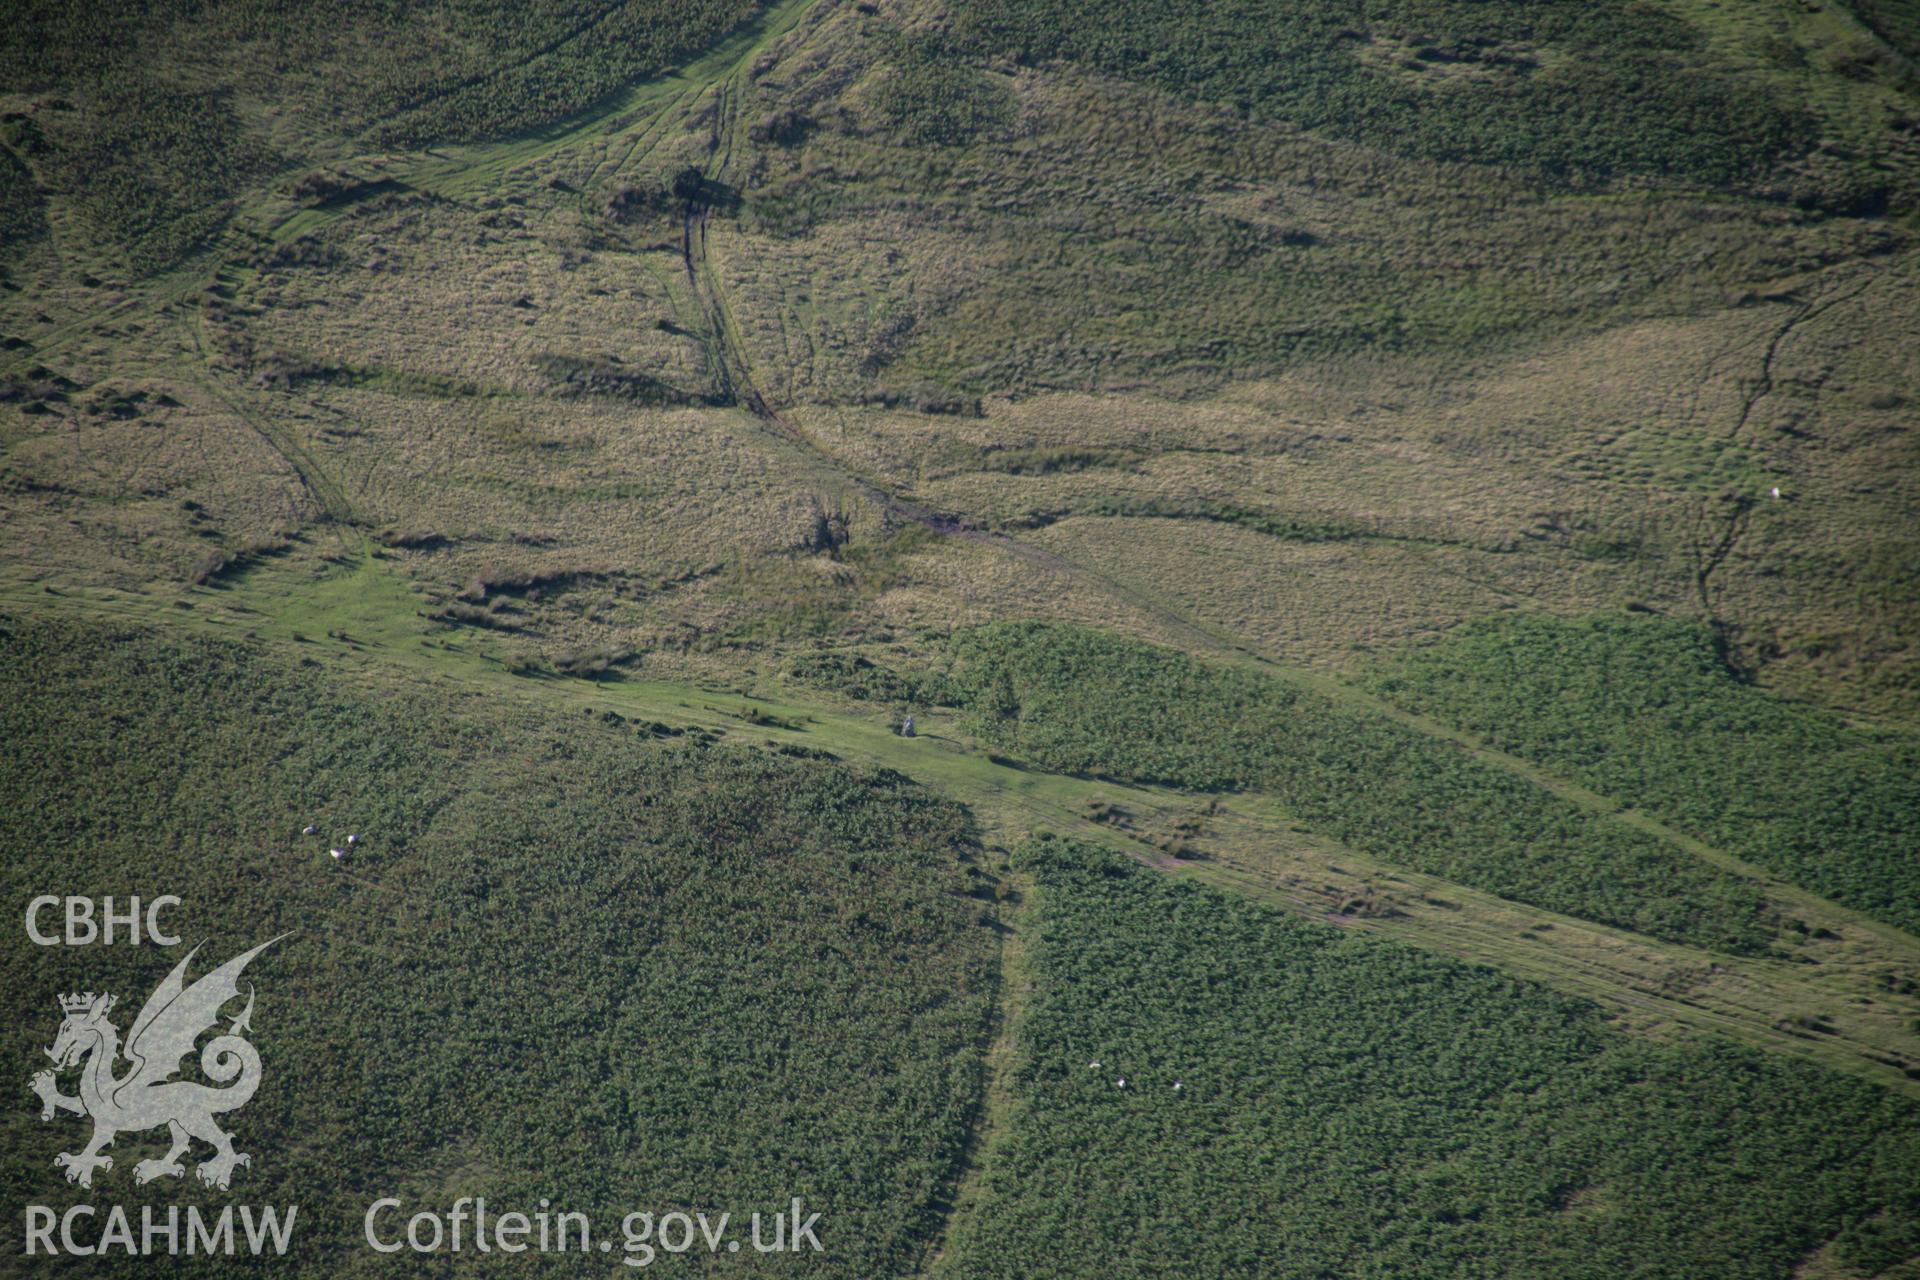 RCAHMW colour oblique aerial photograph of Maen Richard. Taken on 08 August 2007 by Toby Driver